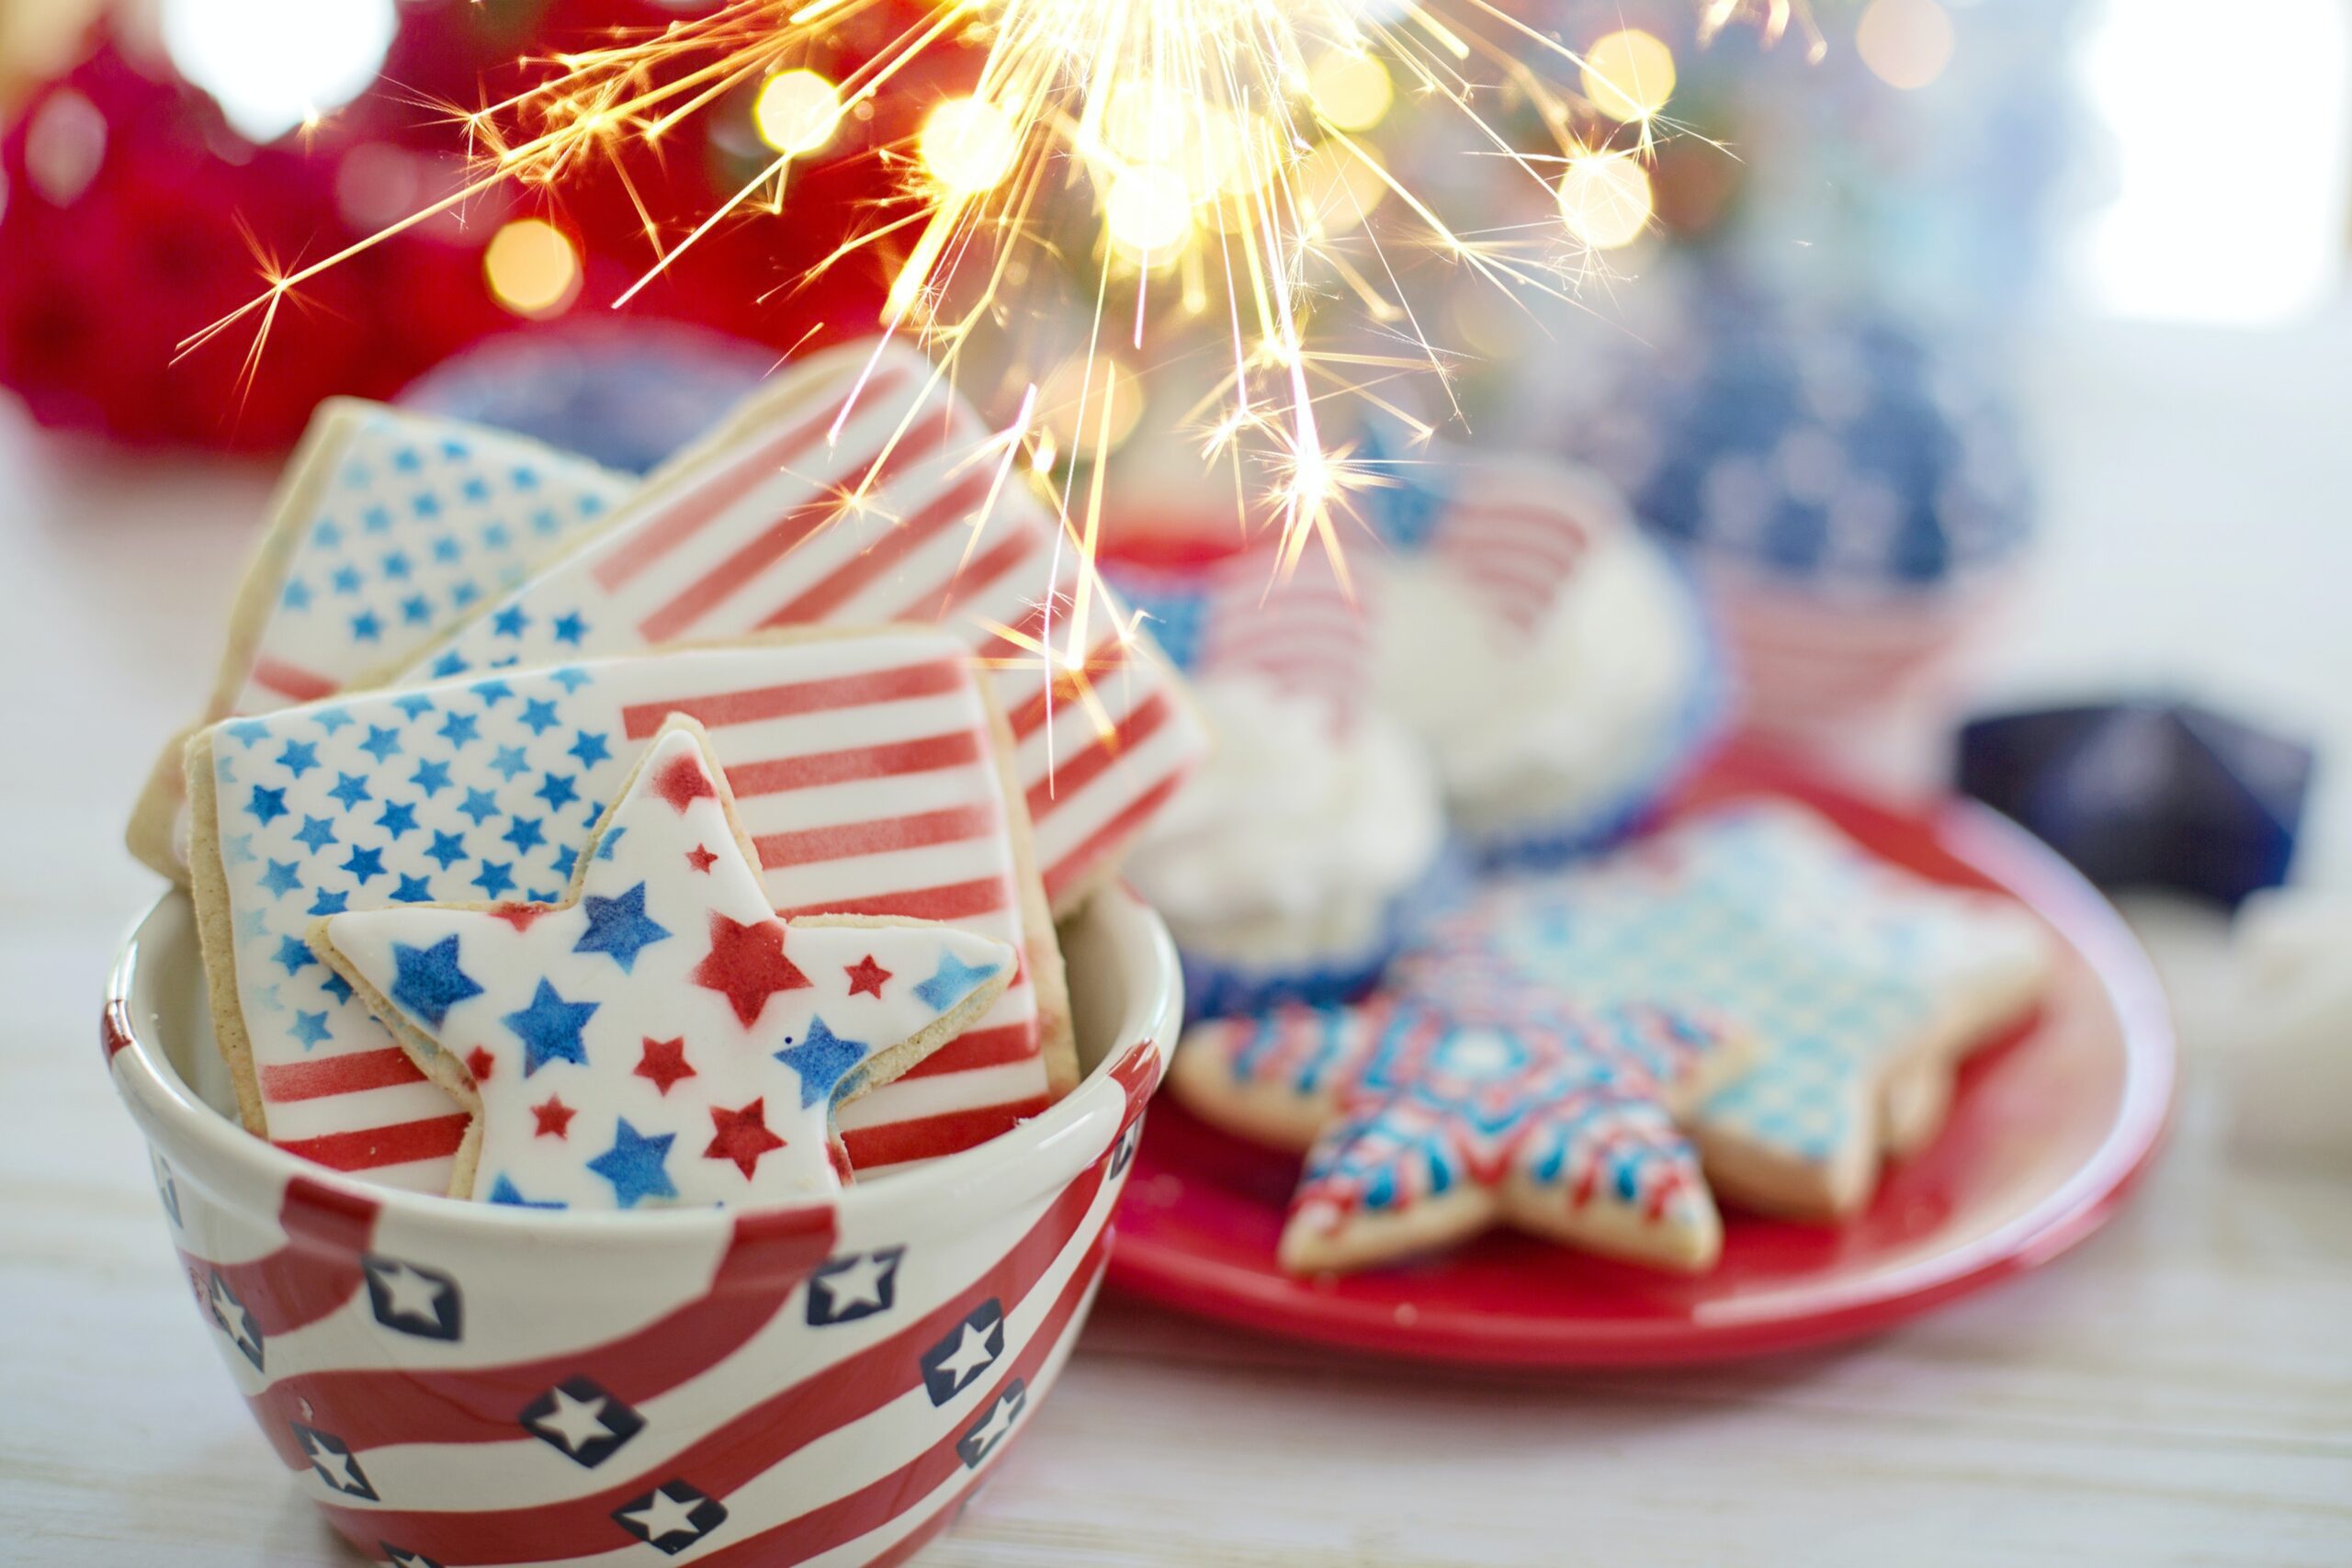 Fun filled family activities for memorable independence day Fourth of July